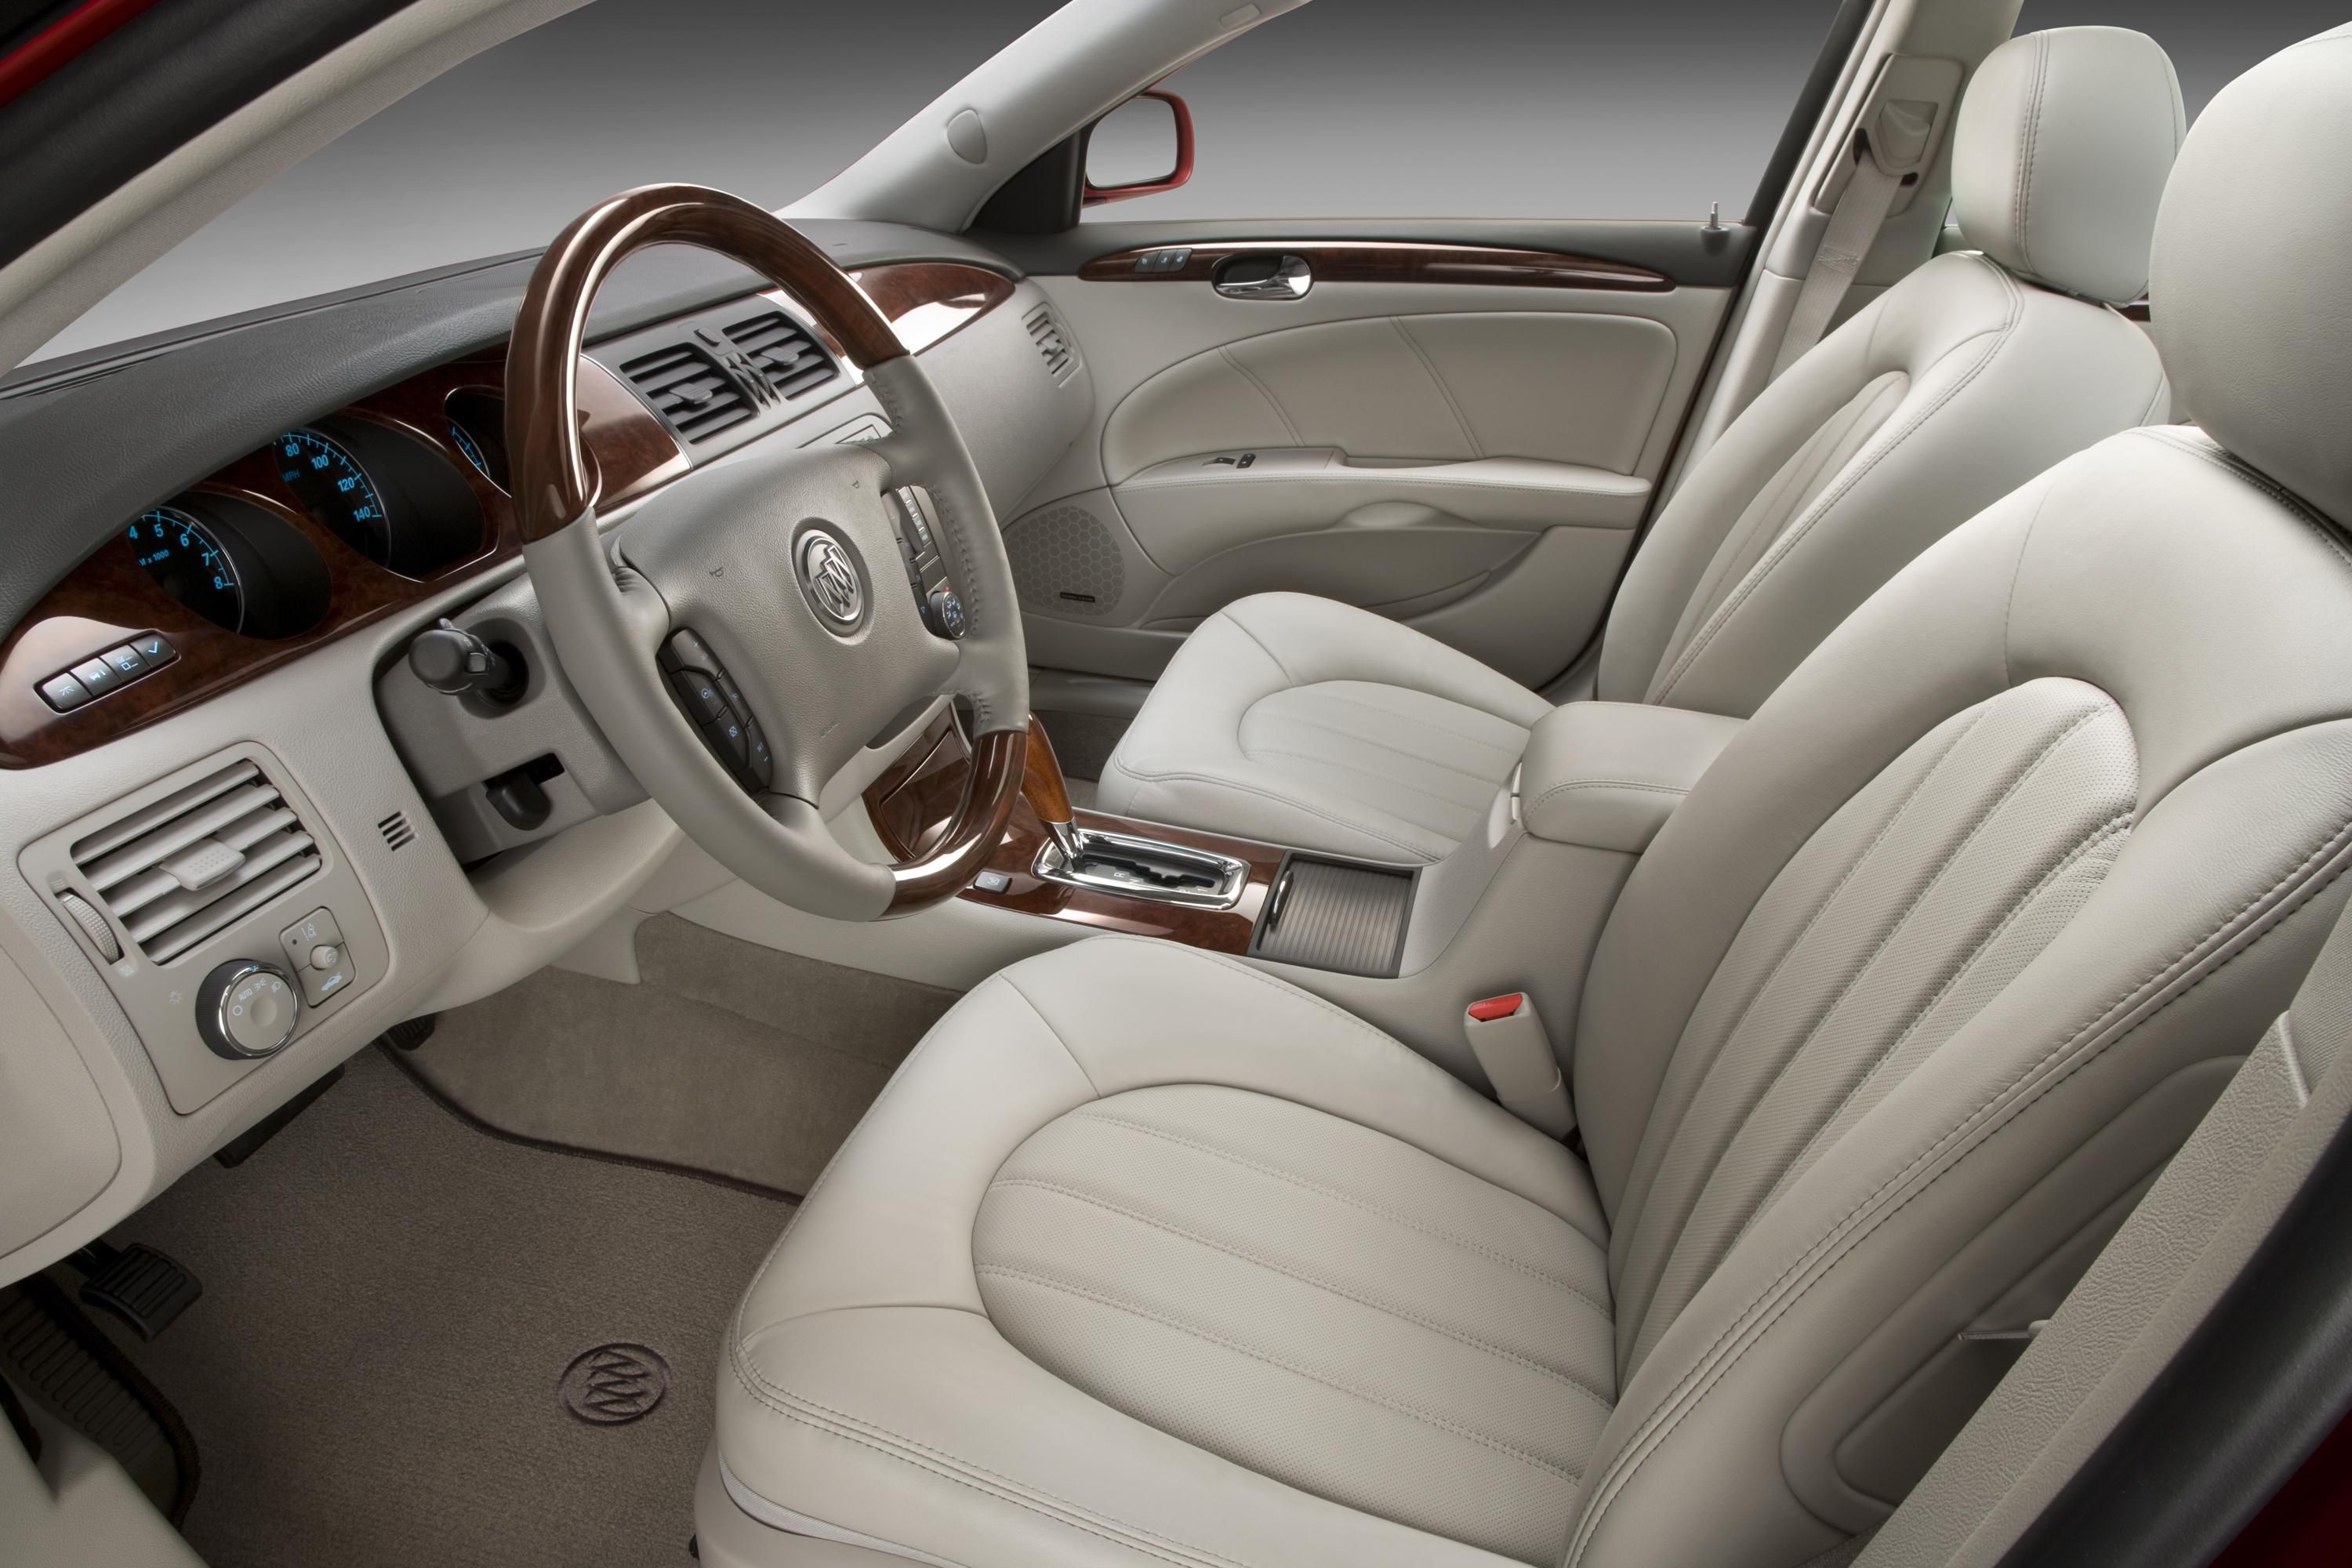 2008 Buick Lucerne CXL Special Edition